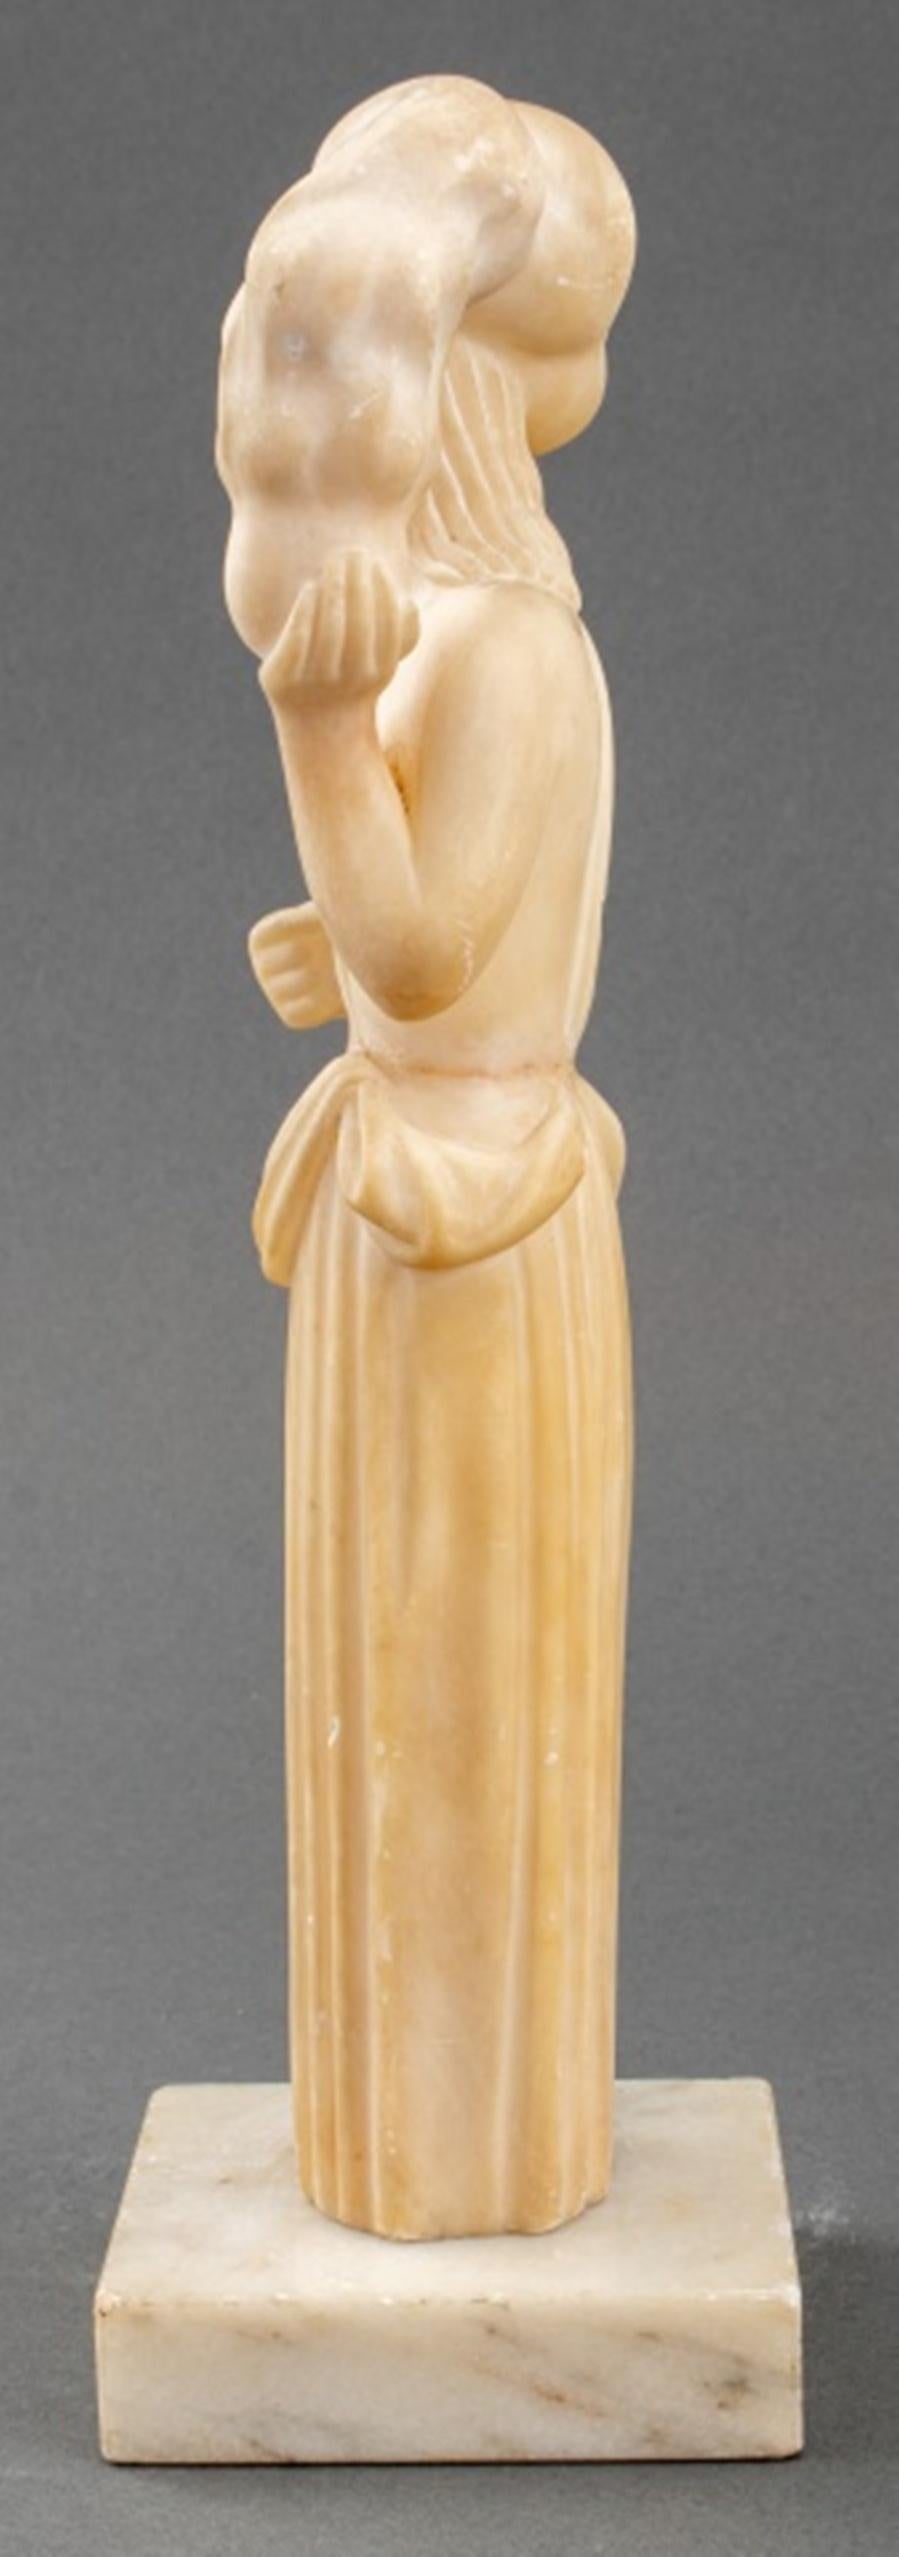 French Art Deco Nude Woman Alabaster Sculpture 1